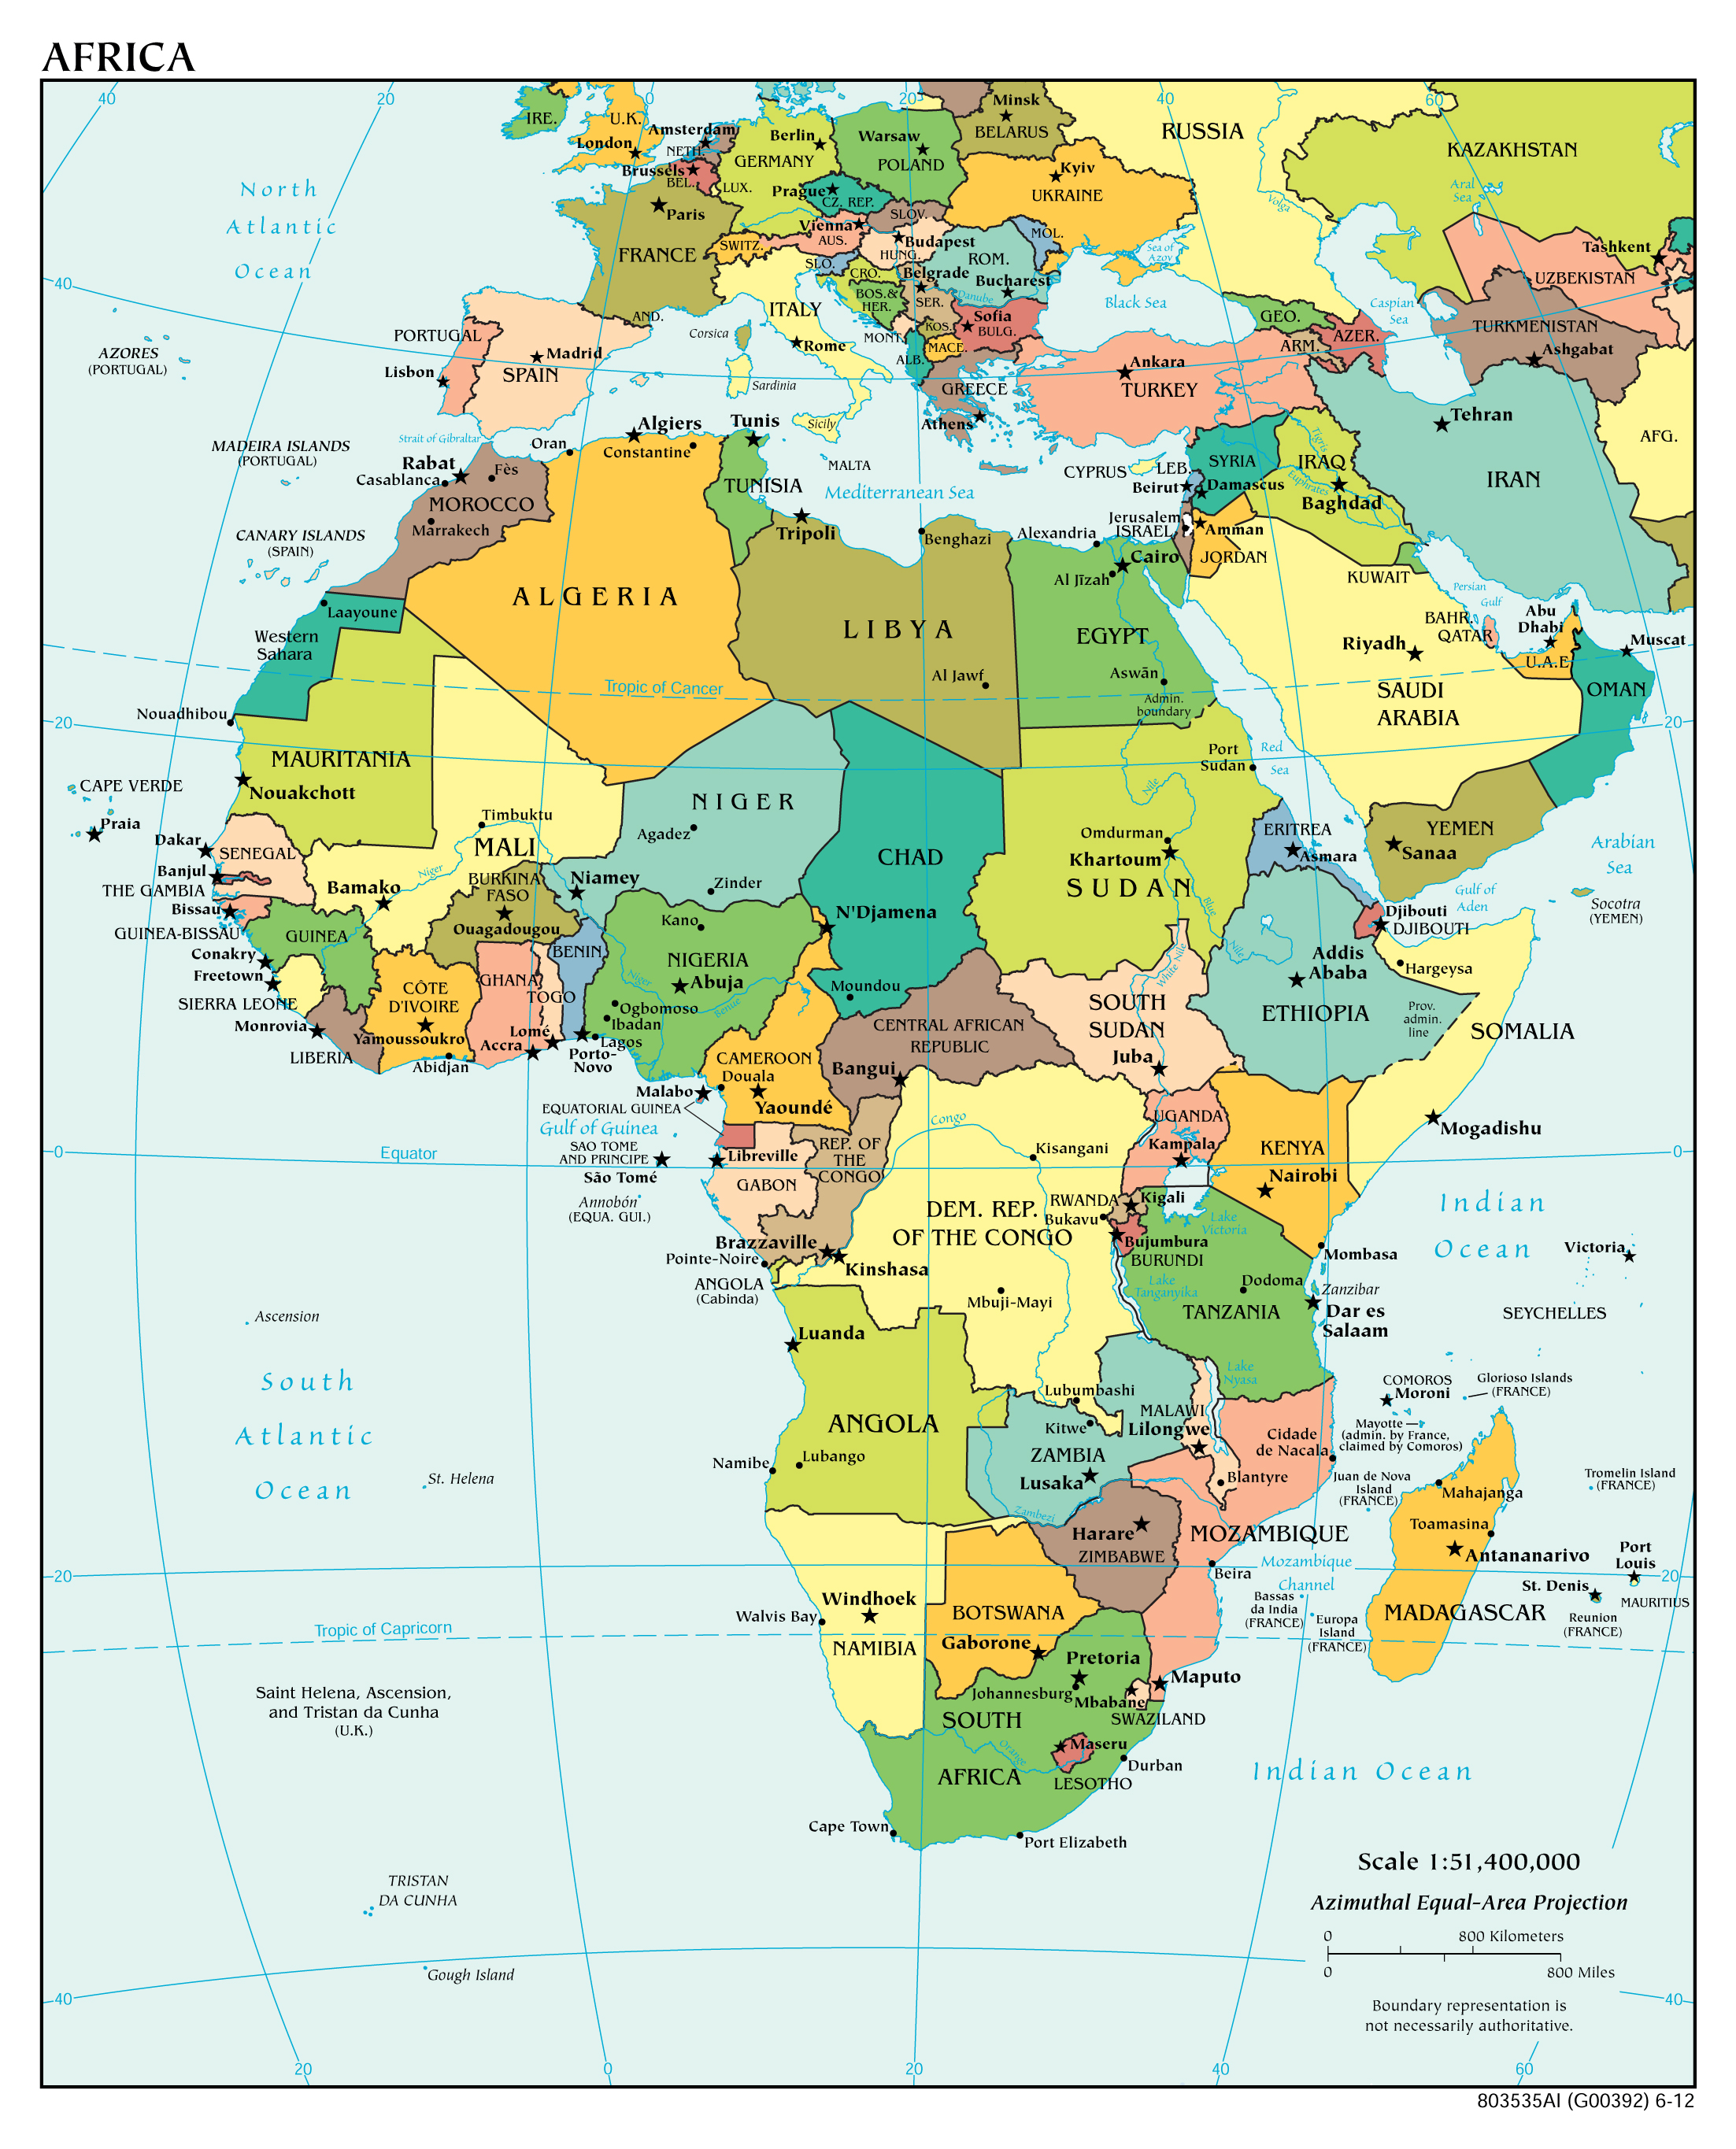 large-detailed-political-map-of-africa-with-major-cities-and-capitals-2012-africa-mapsland